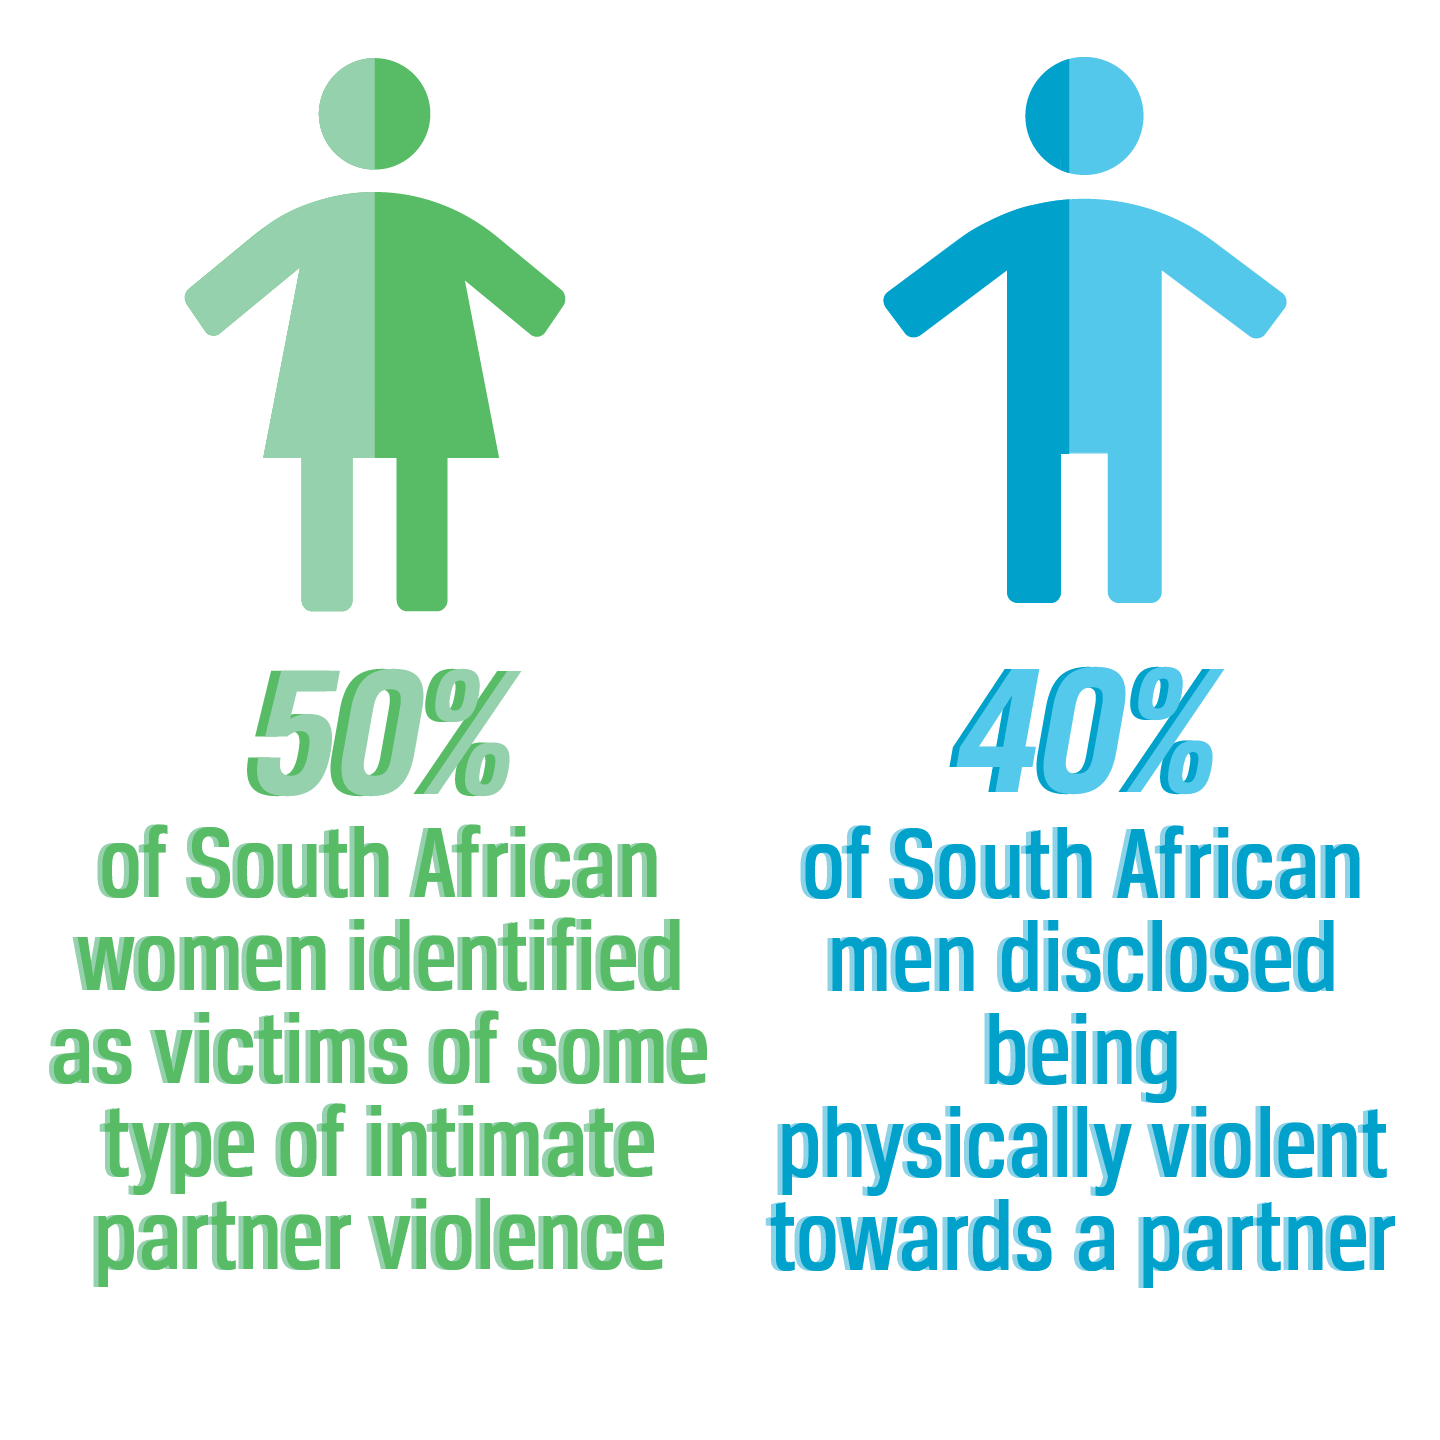 literature review on gender based violence in south africa